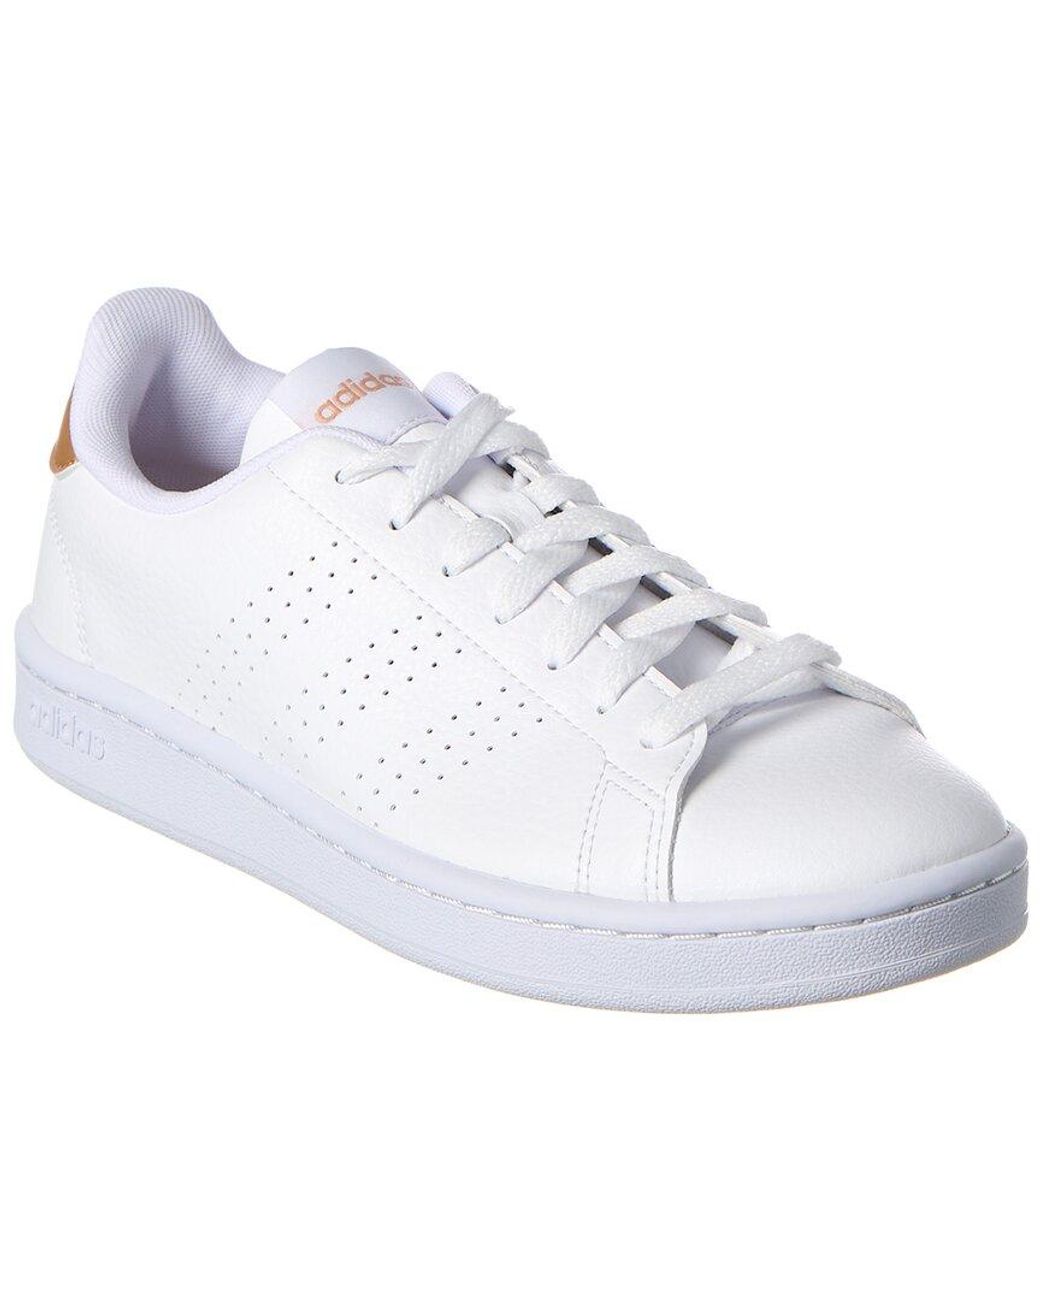 adidas Advantage Leather Sneaker in White | Lyst